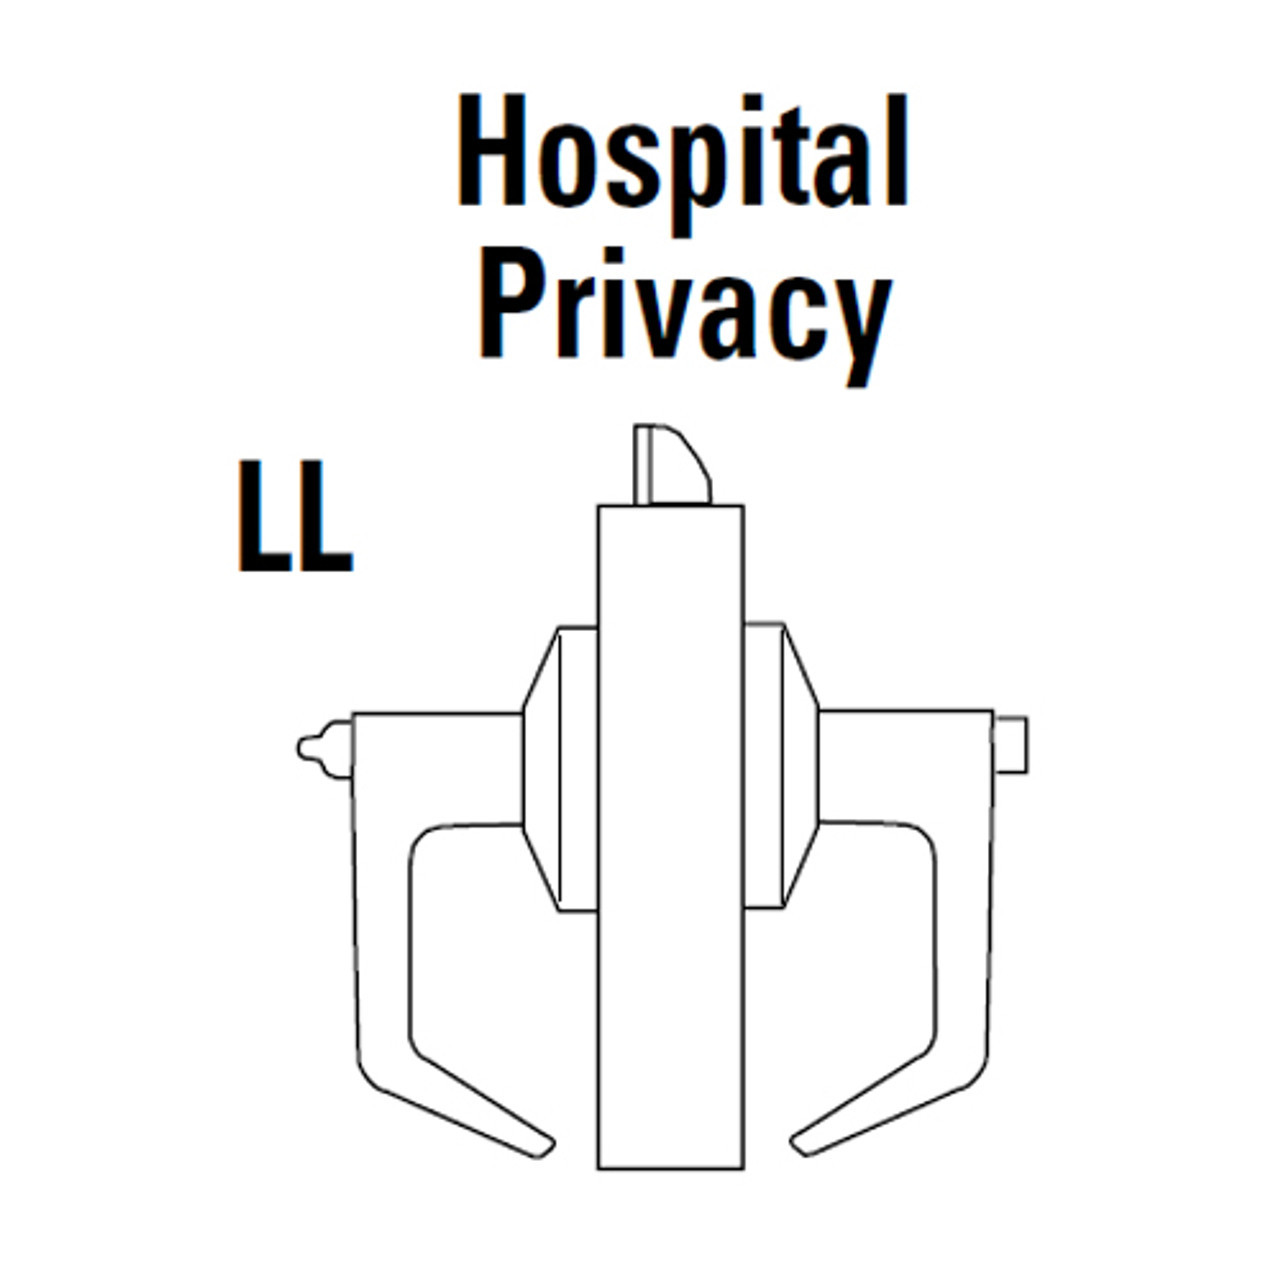 9K30LL14DSTK625LM Best 9K Series Hospital Privacy Heavy Duty Cylindrical Lever Locks in Bright Chrome